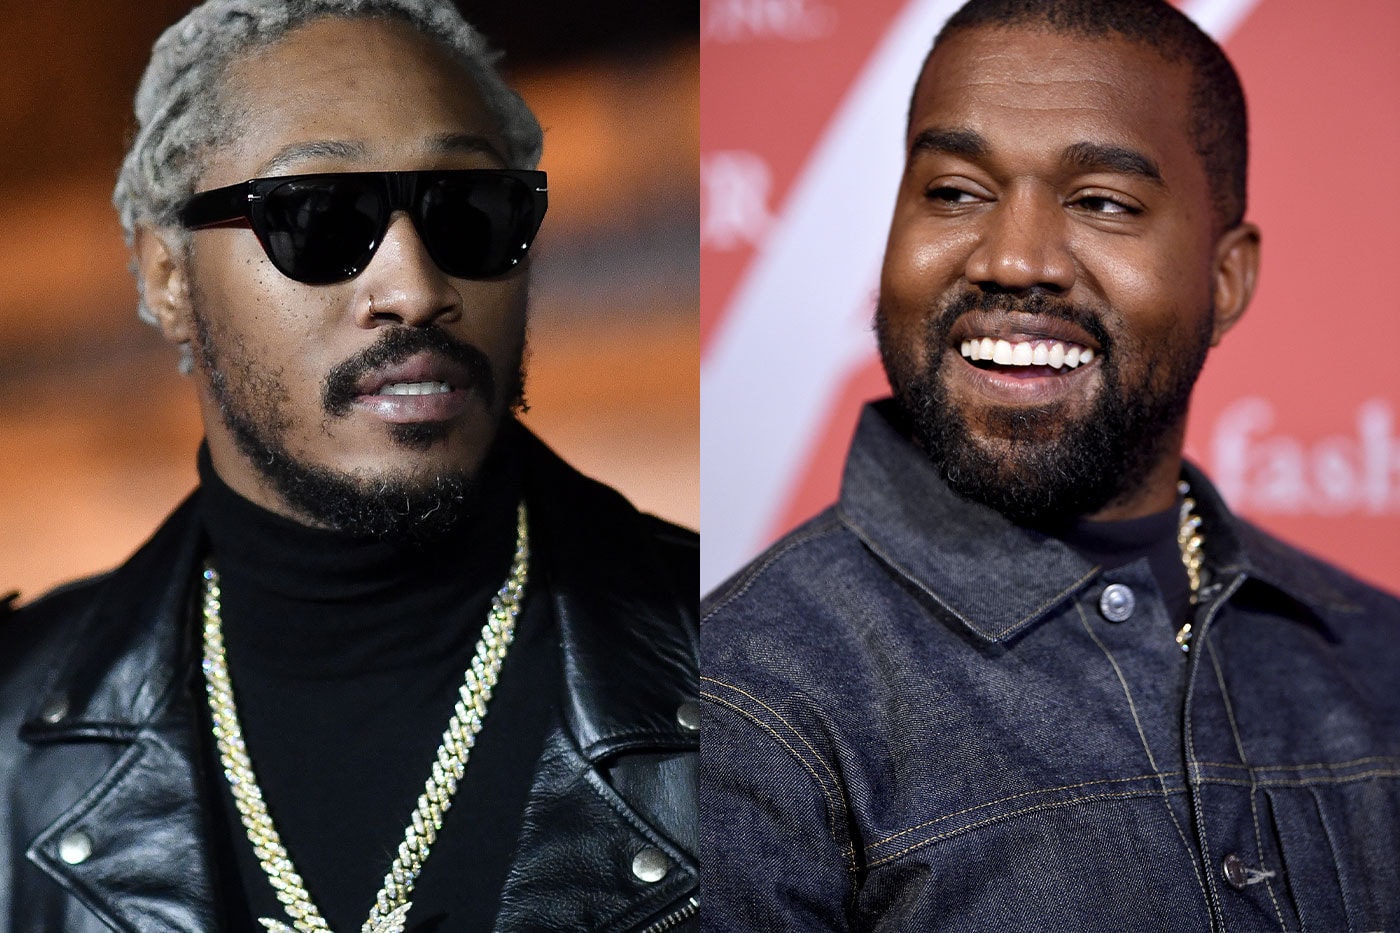 Future Teases New Album Release Date and Kanye West Feature rapper hip hop young scooter high off life donda music video